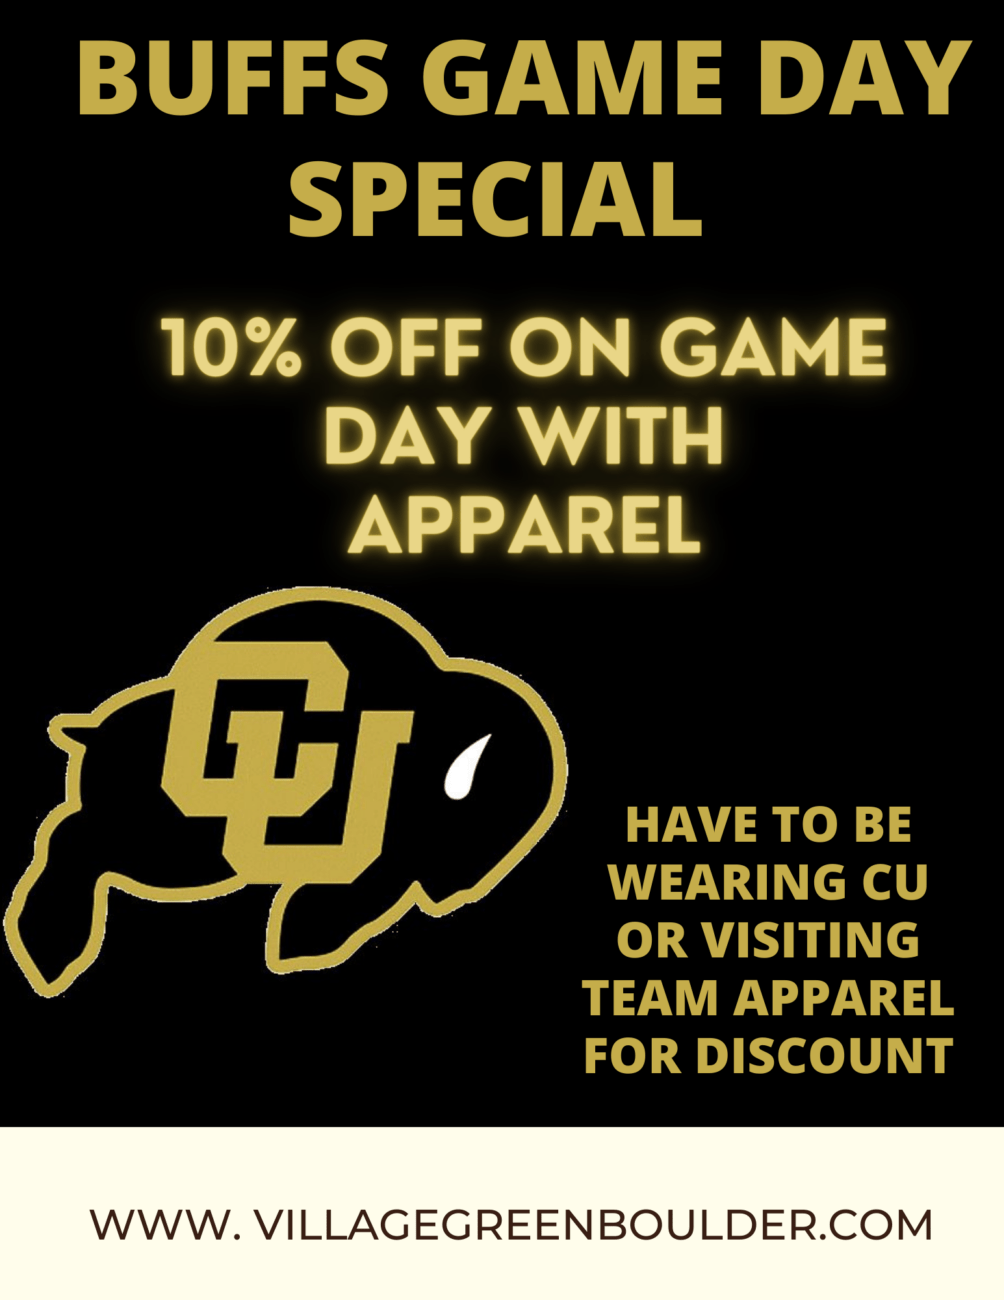 Come in on a game day with CU or the visiting team's apparel and receive 10% off your entire purchase!